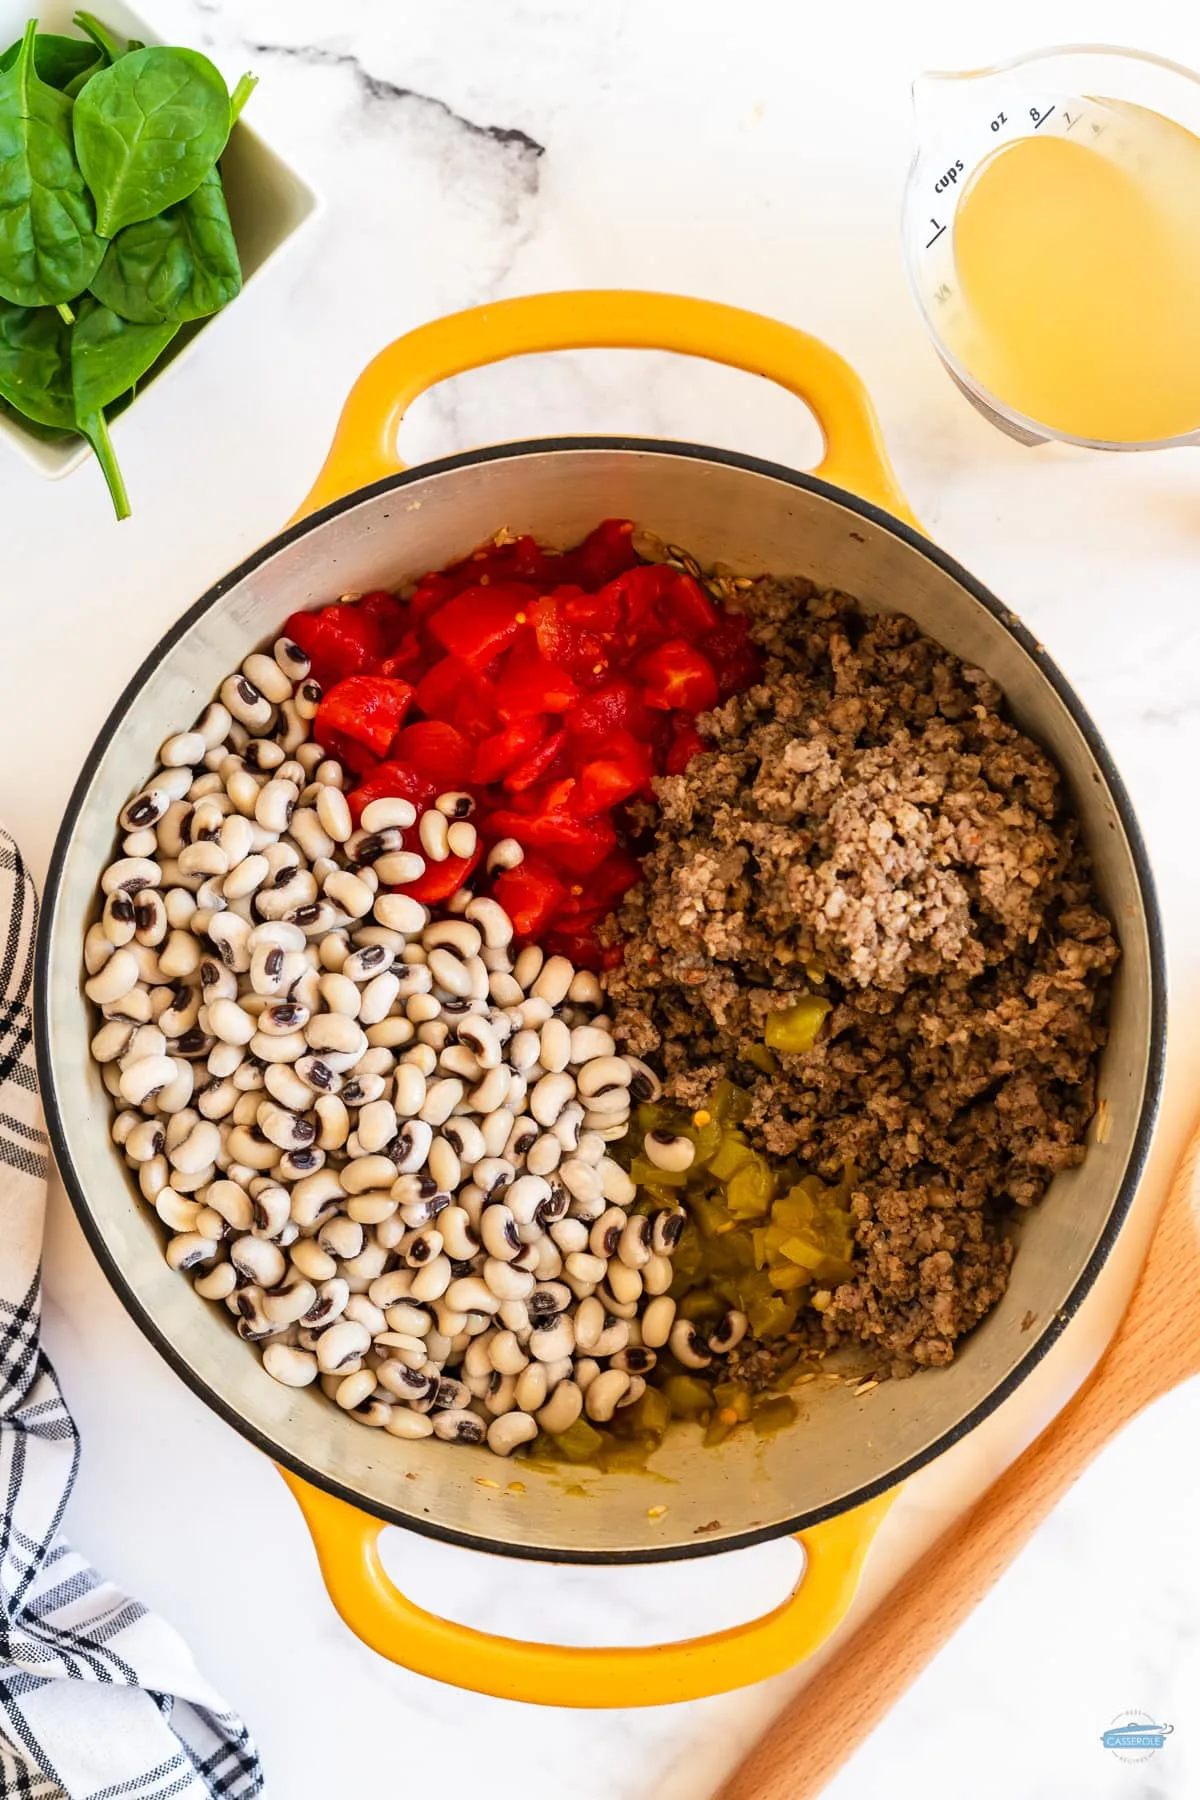 tomatoes, black eyed peas, and ground beef in a yellow pot